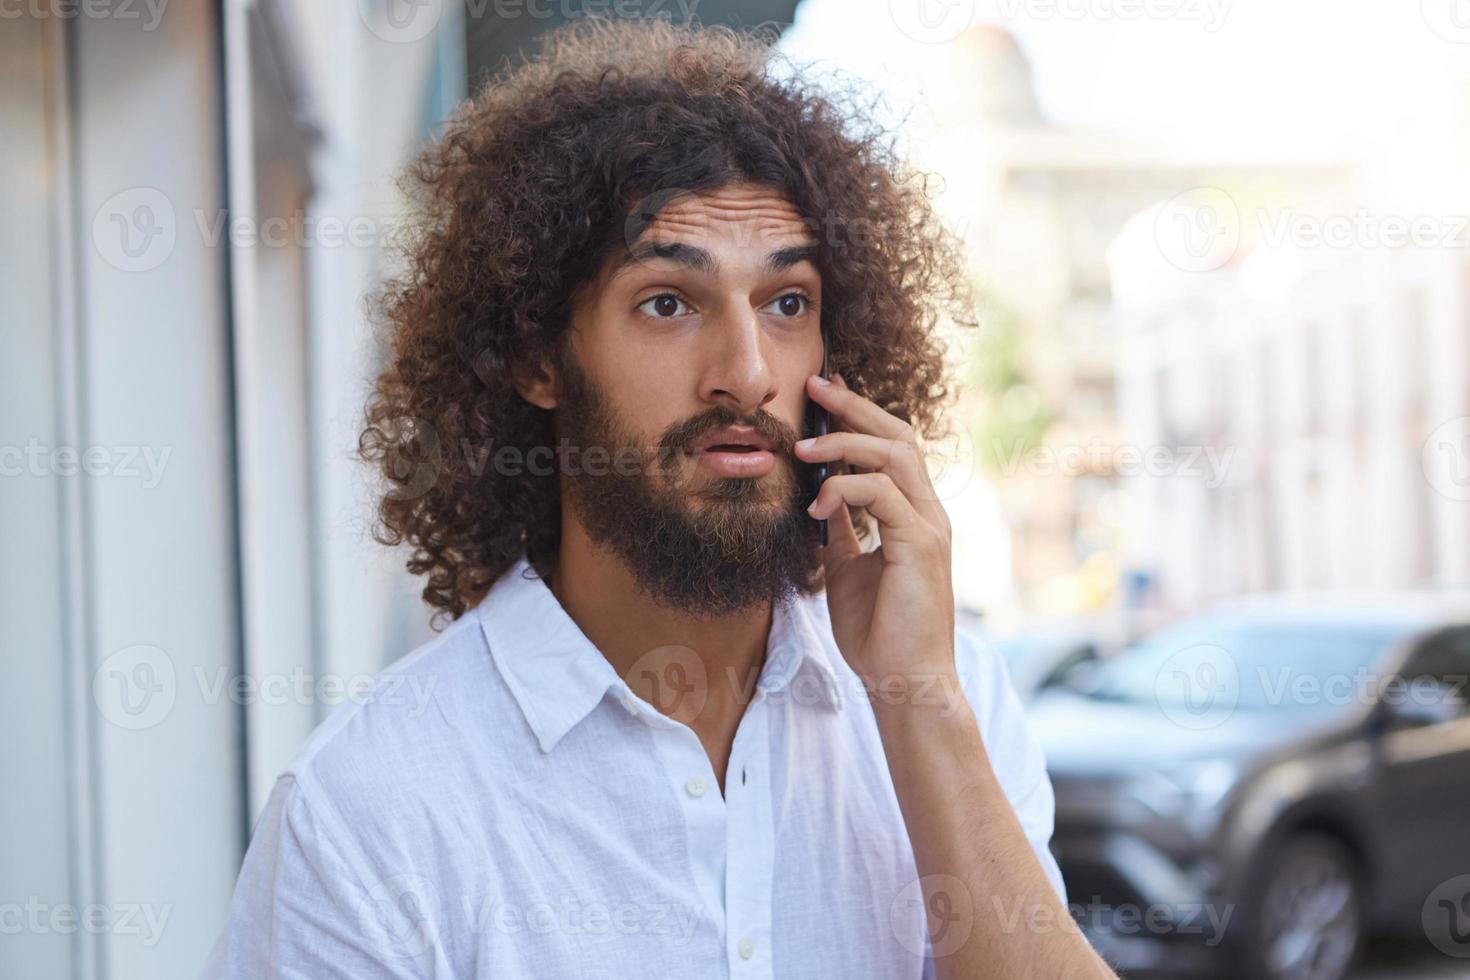 Surprised handsome bearded guy with brown curly hair walking down the street with mobile phone in hand, wrinkling forehead and raising eyebrows photo